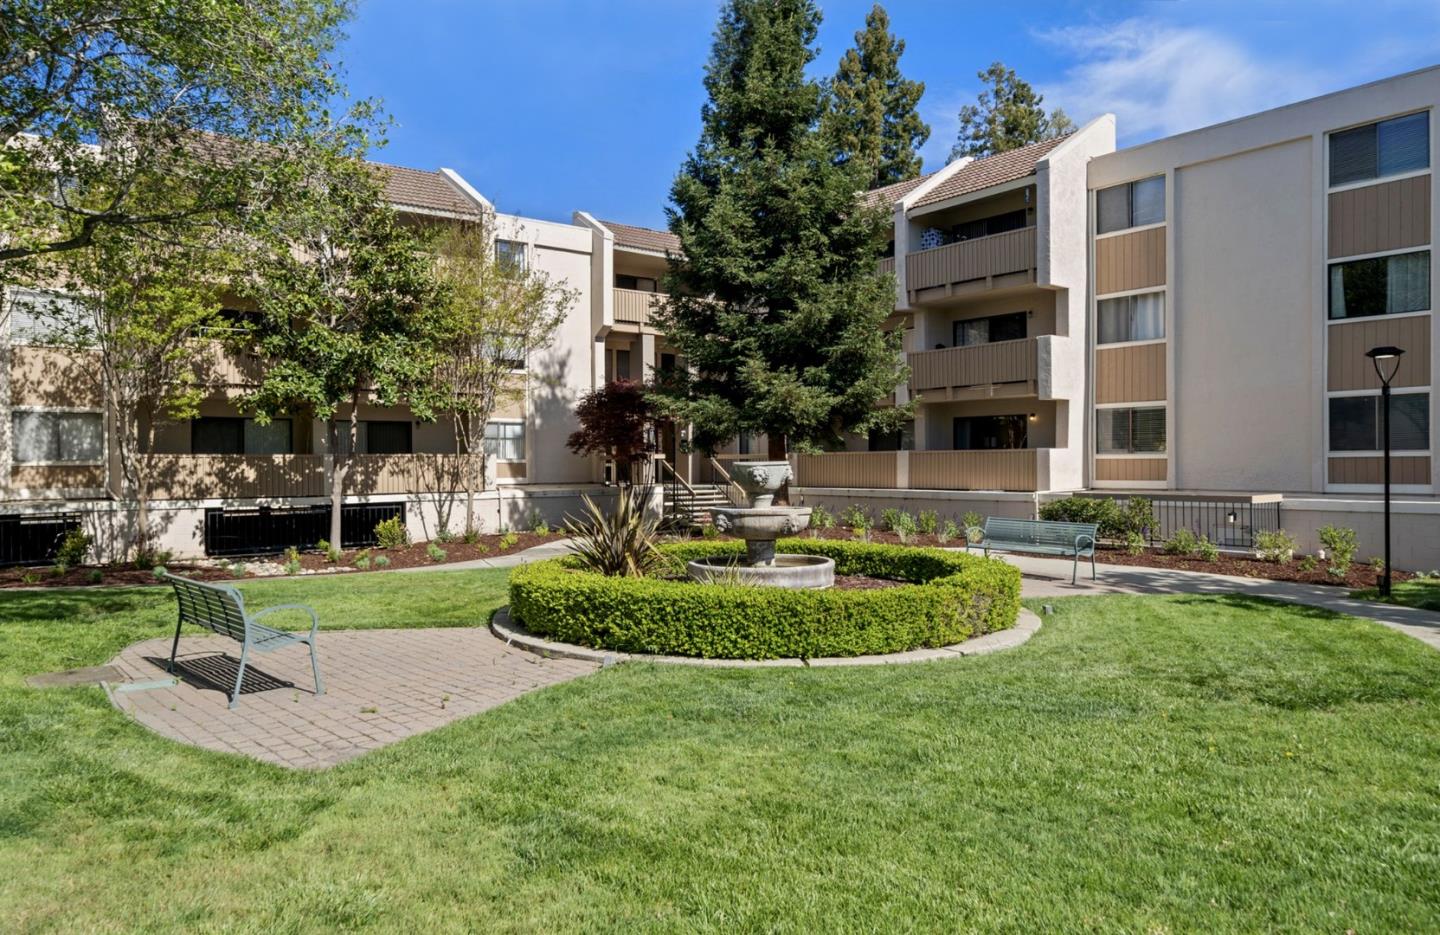 Photo of 400 Ortega Ave #102 in Mountain View, CA